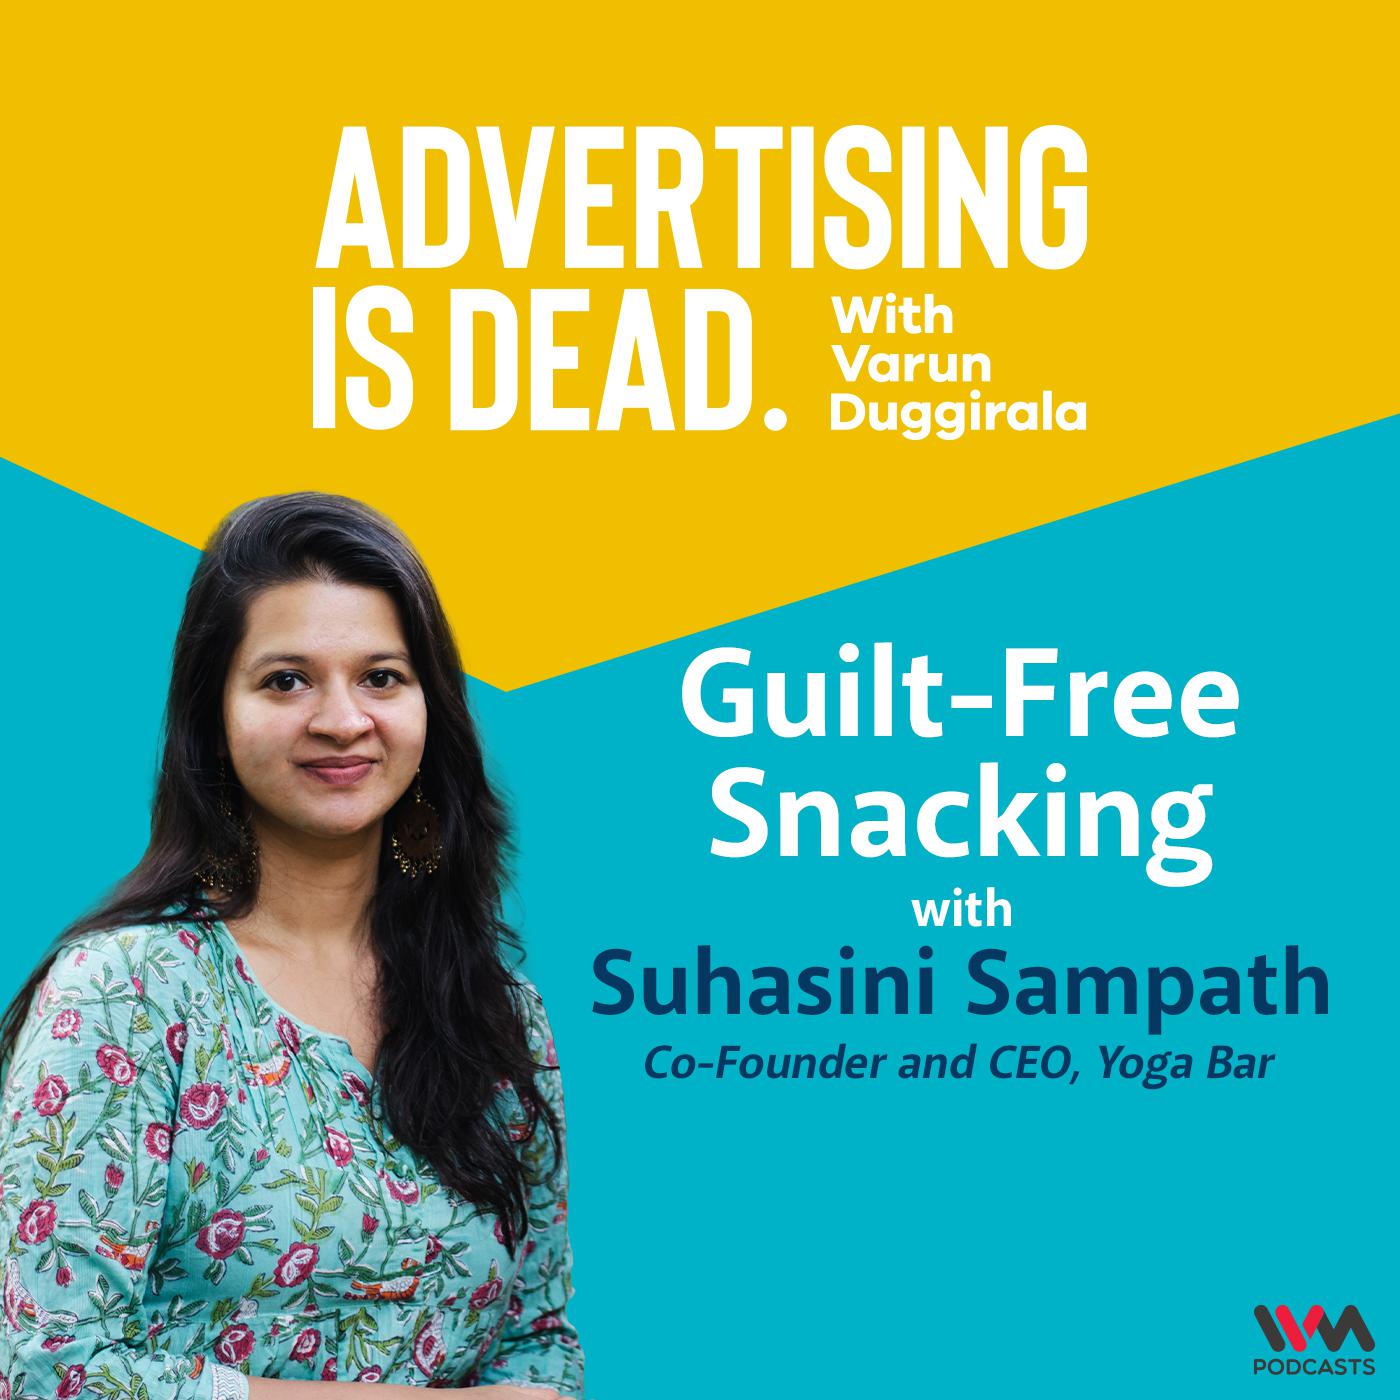 Guilt-free snacking with Suhasini Sampath